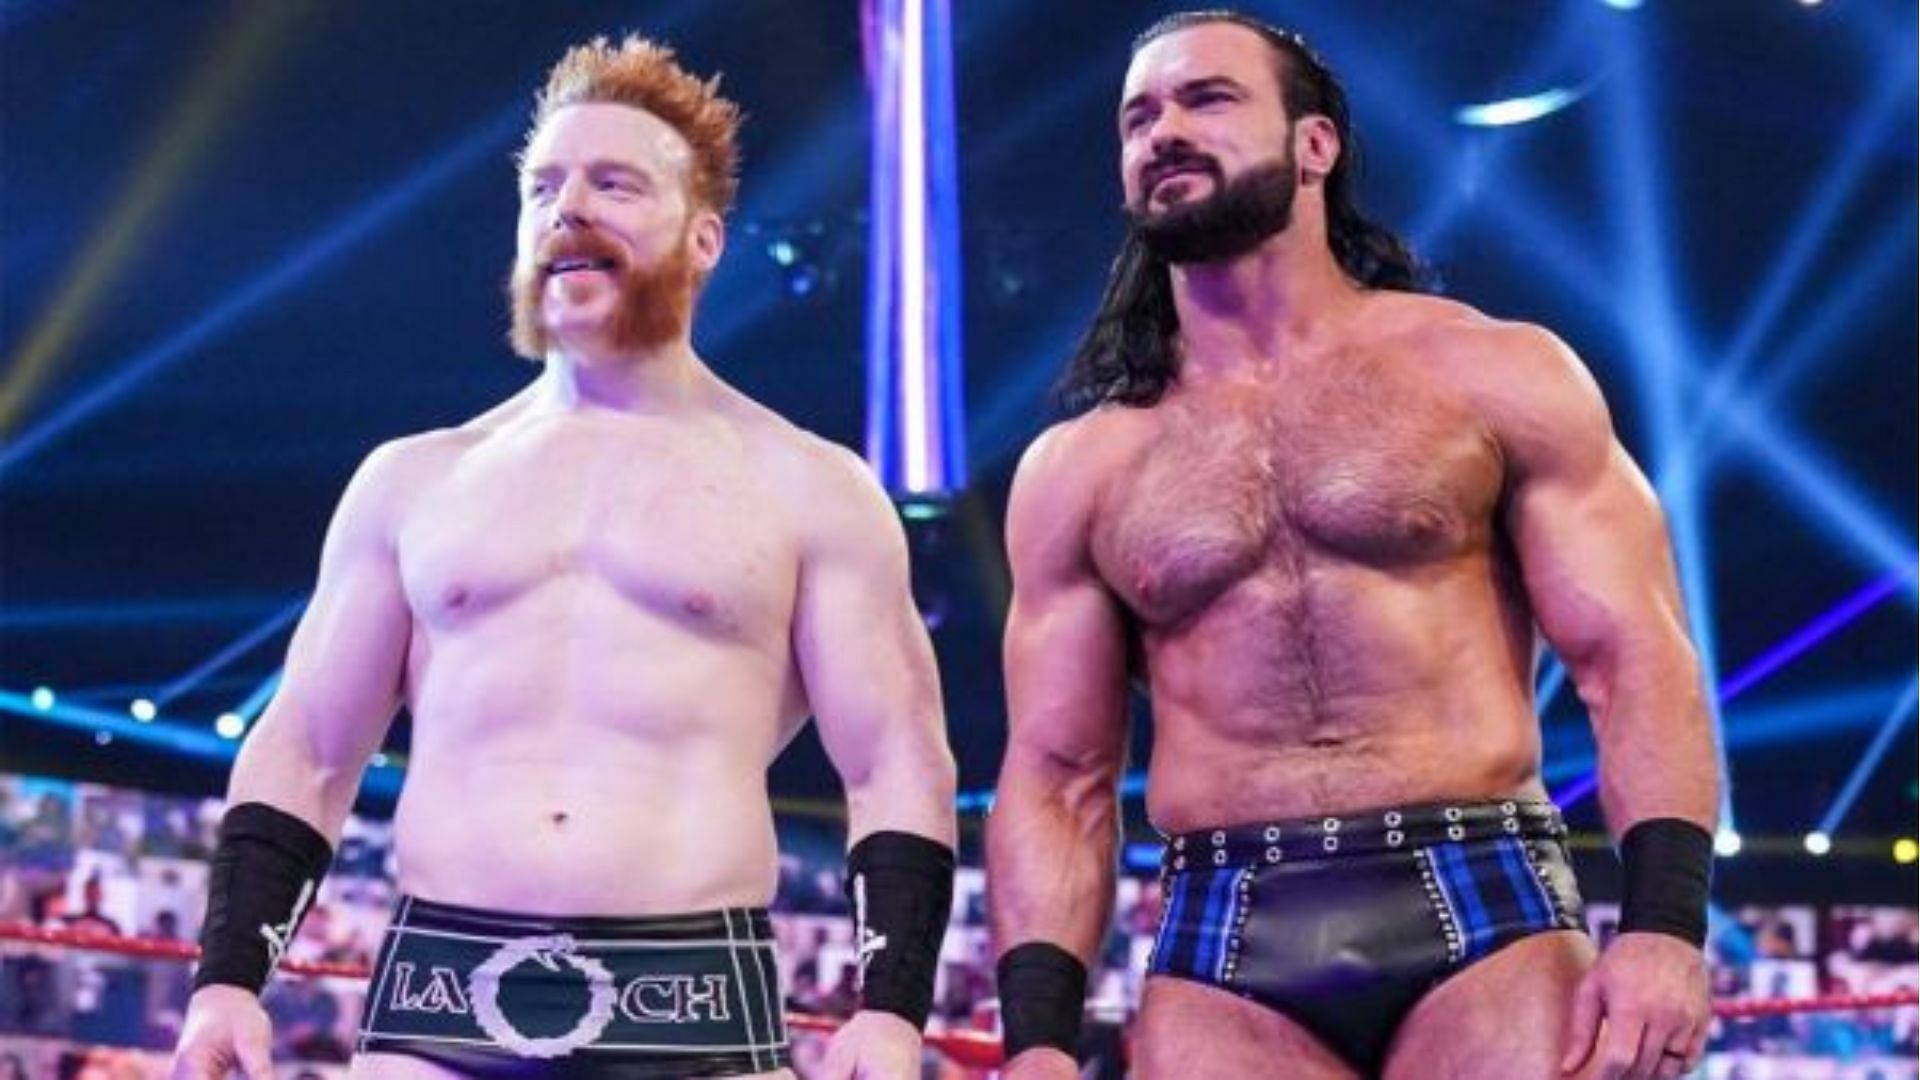 McIntyre and Sheamus have had a love/hate relationship in WWE